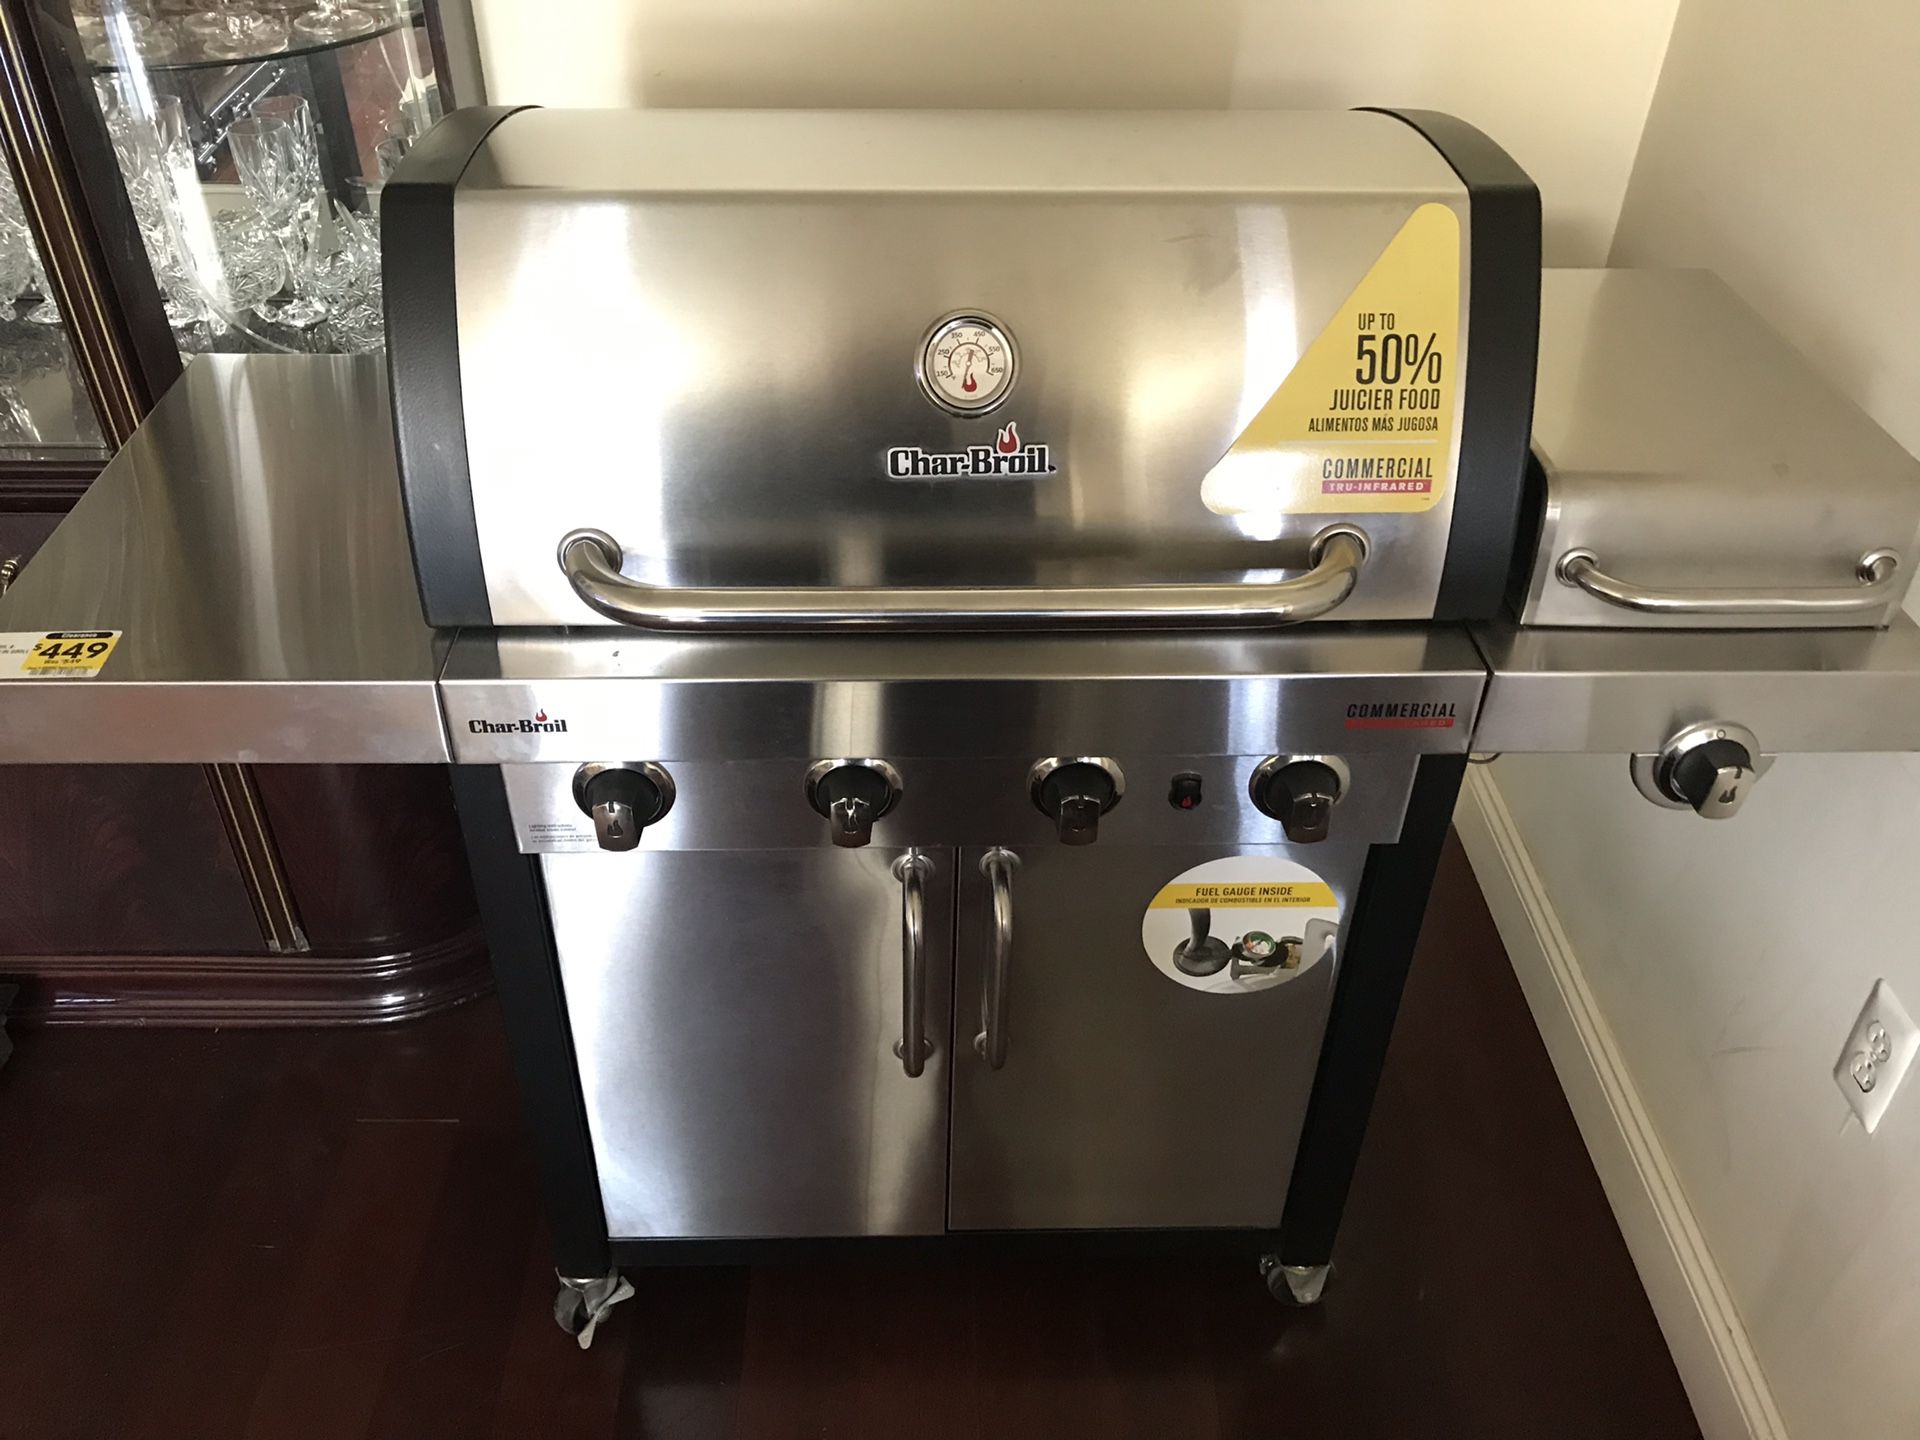 New-Charbroil Stainless Grill w/side burner $300